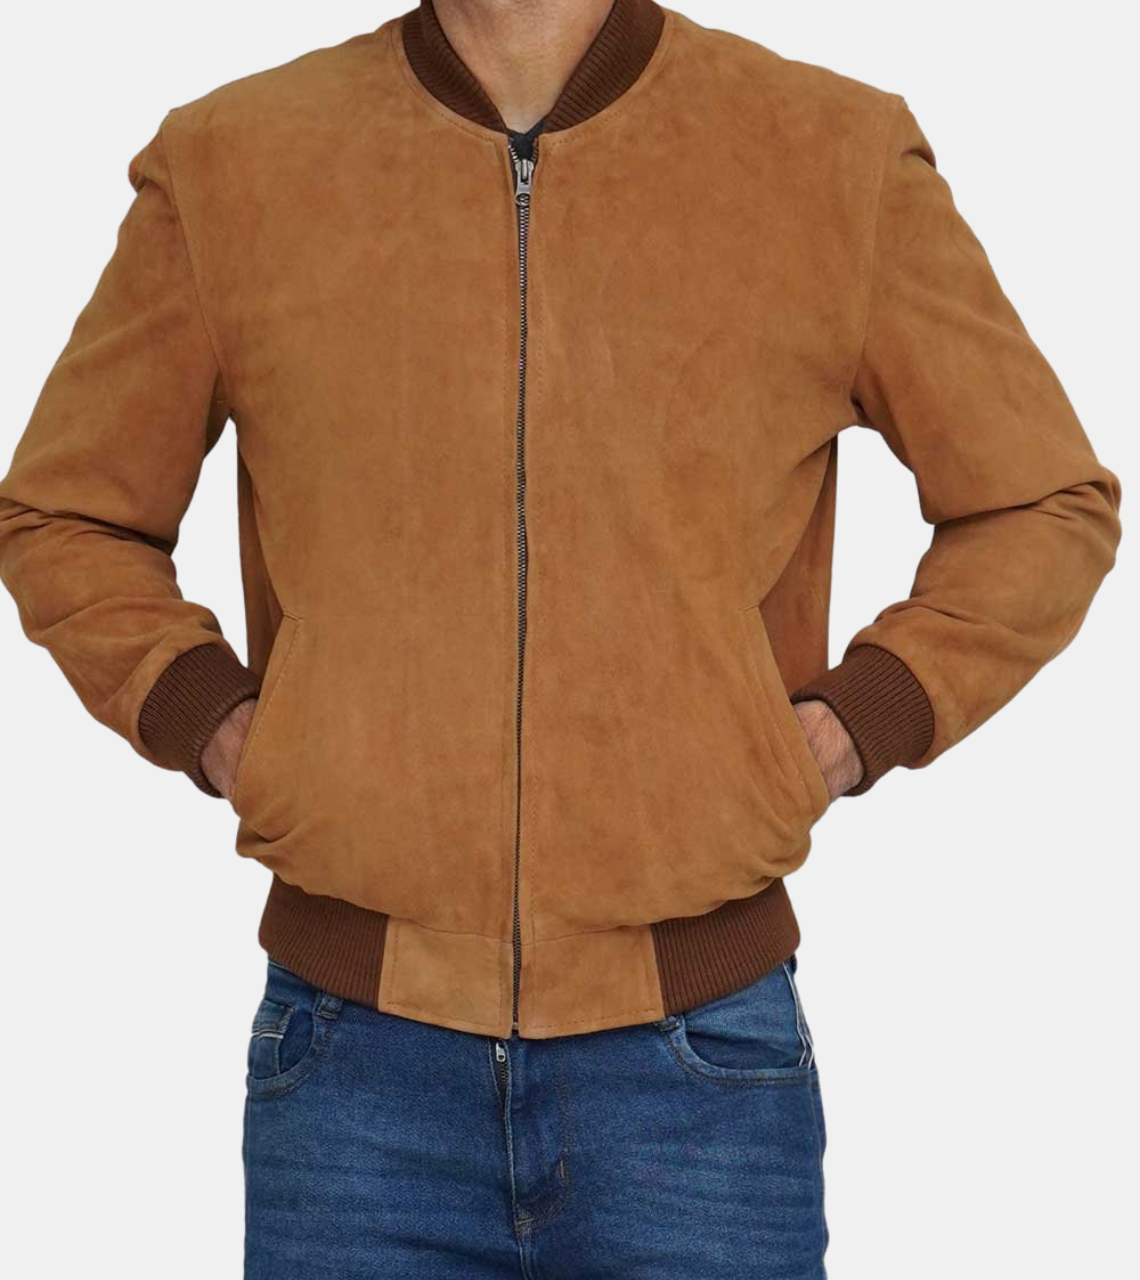 Brown Suede Bomber Leather Jacket For Men's